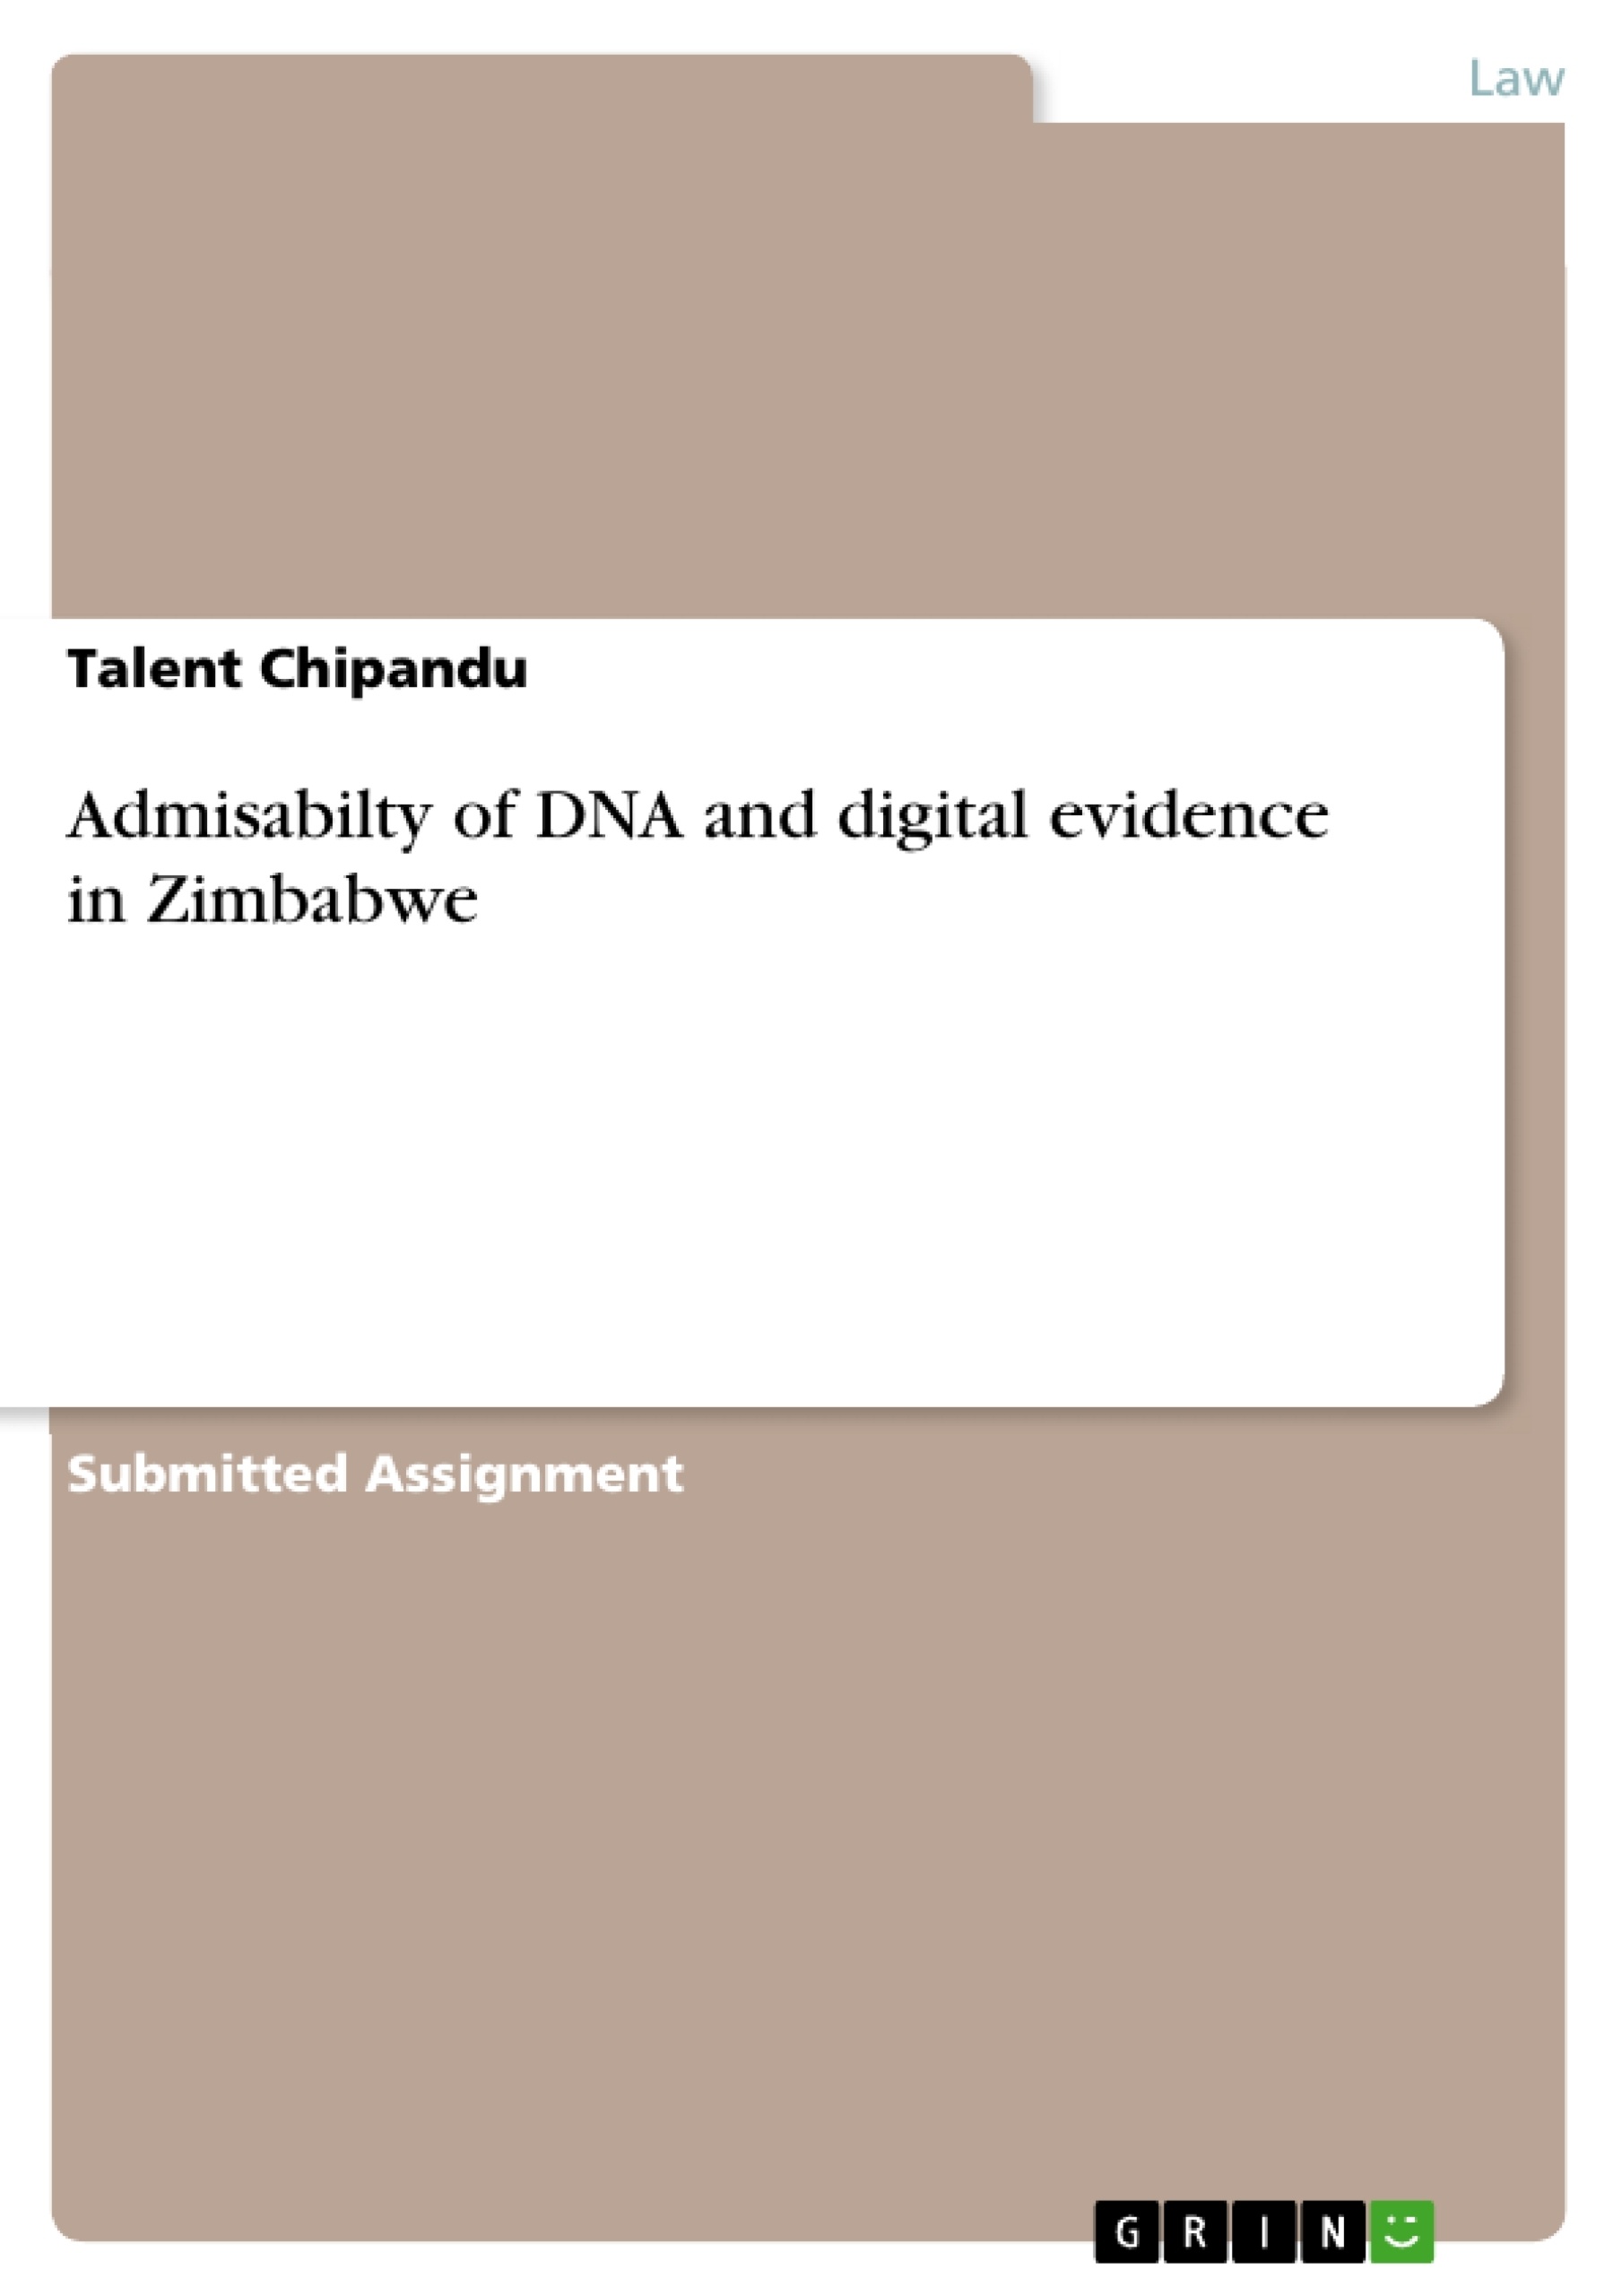 and　evidence　Zimbabwe　Admisabilty　of　DNA　digital　in　GRIN